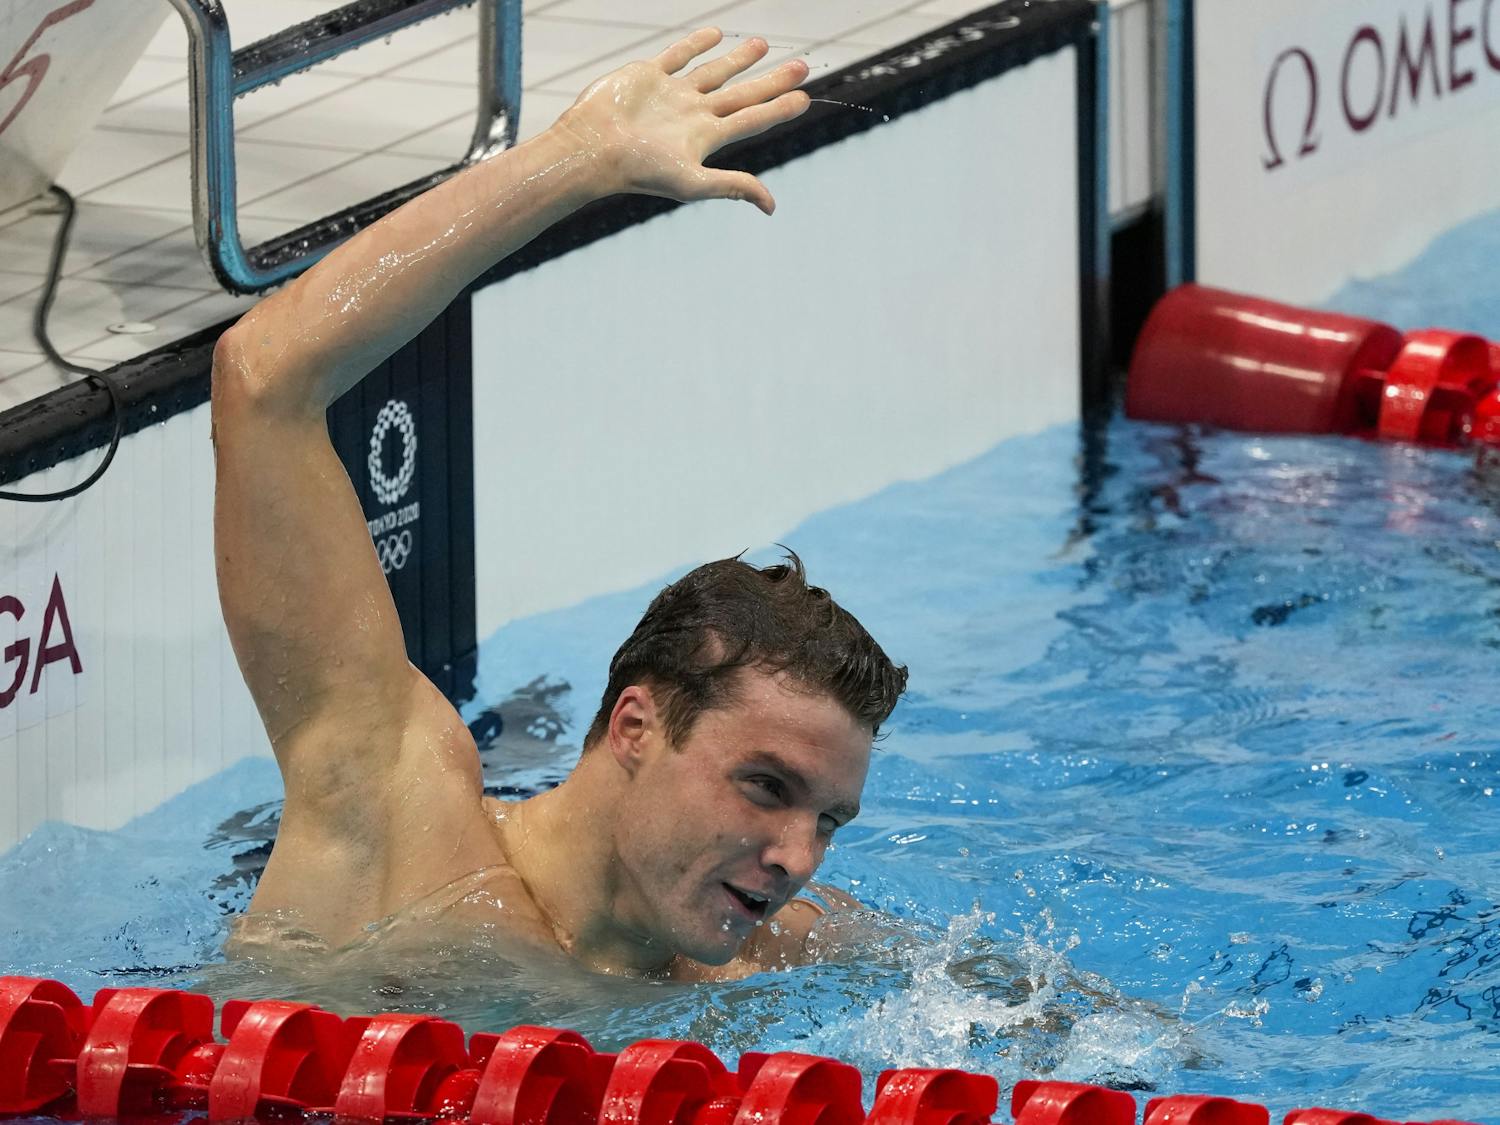 Robert Finke, of United States, celebrates after winning the gold medal in the men's 1500-meter freestyle final at the 2020 Summer Olympics, Sunday, Aug. 1, 2021, in Tokyo, Japan. (AP Photo/Jae C. Hong)